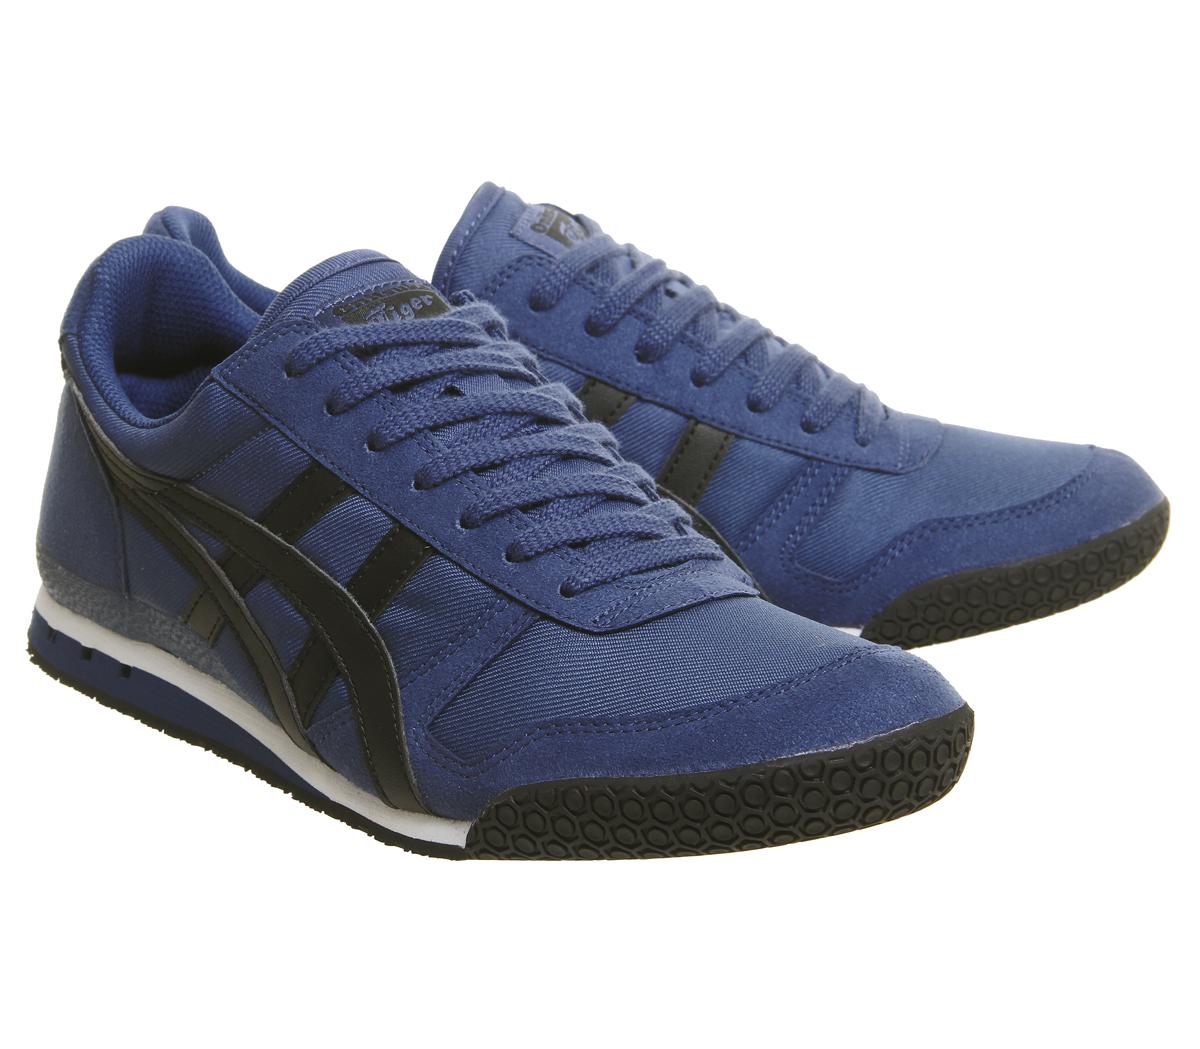  Onitsuka  Tiger  Ultimate  81 Trainers  Midnight Blue Black 